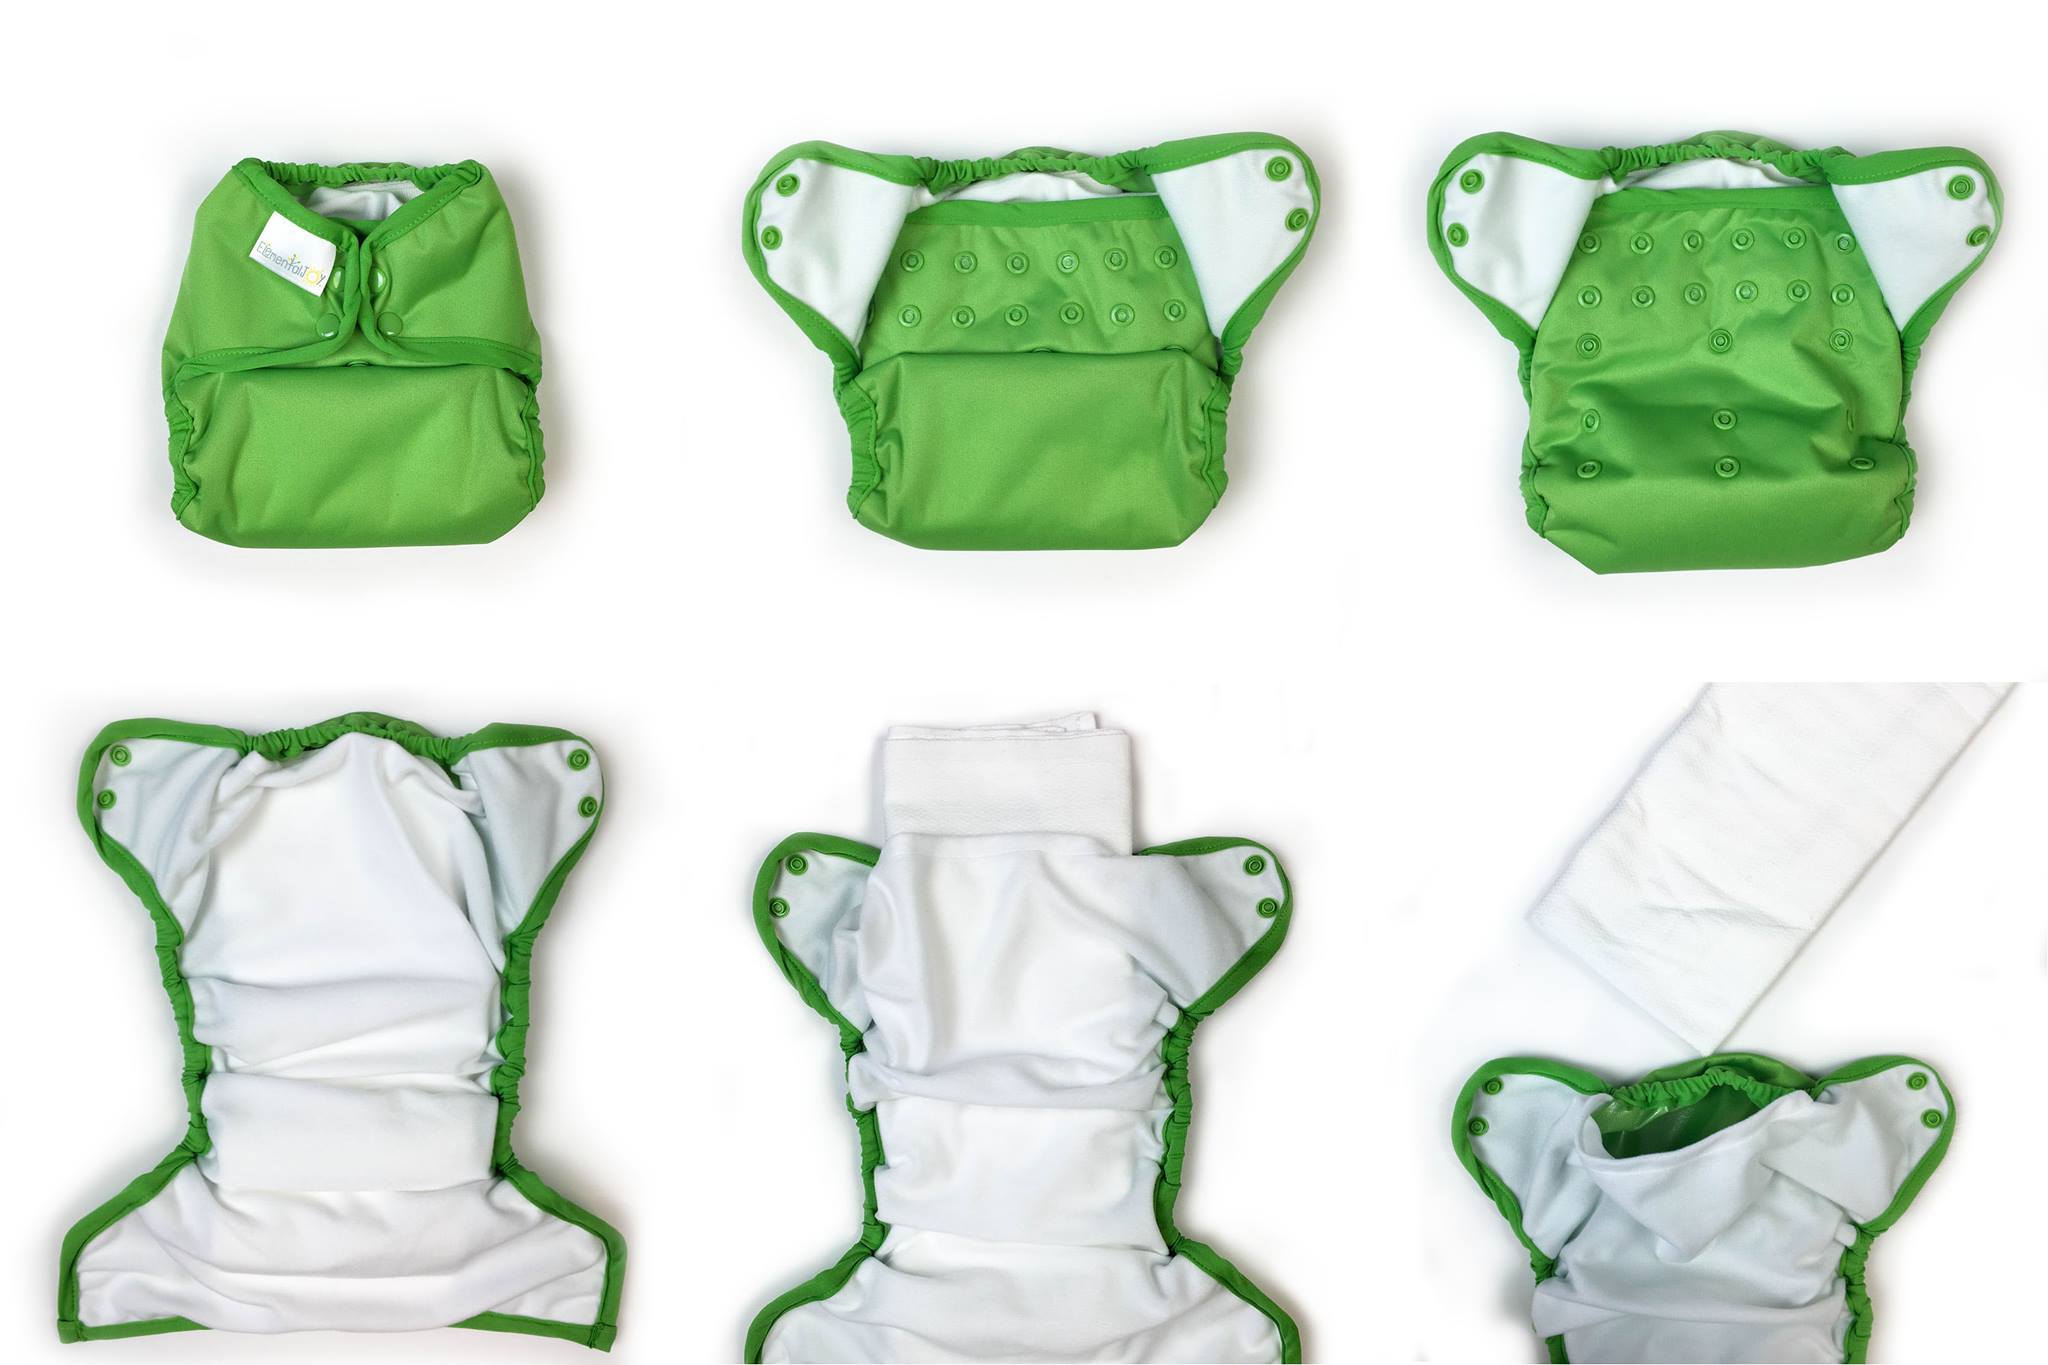 cheap pocket diapers